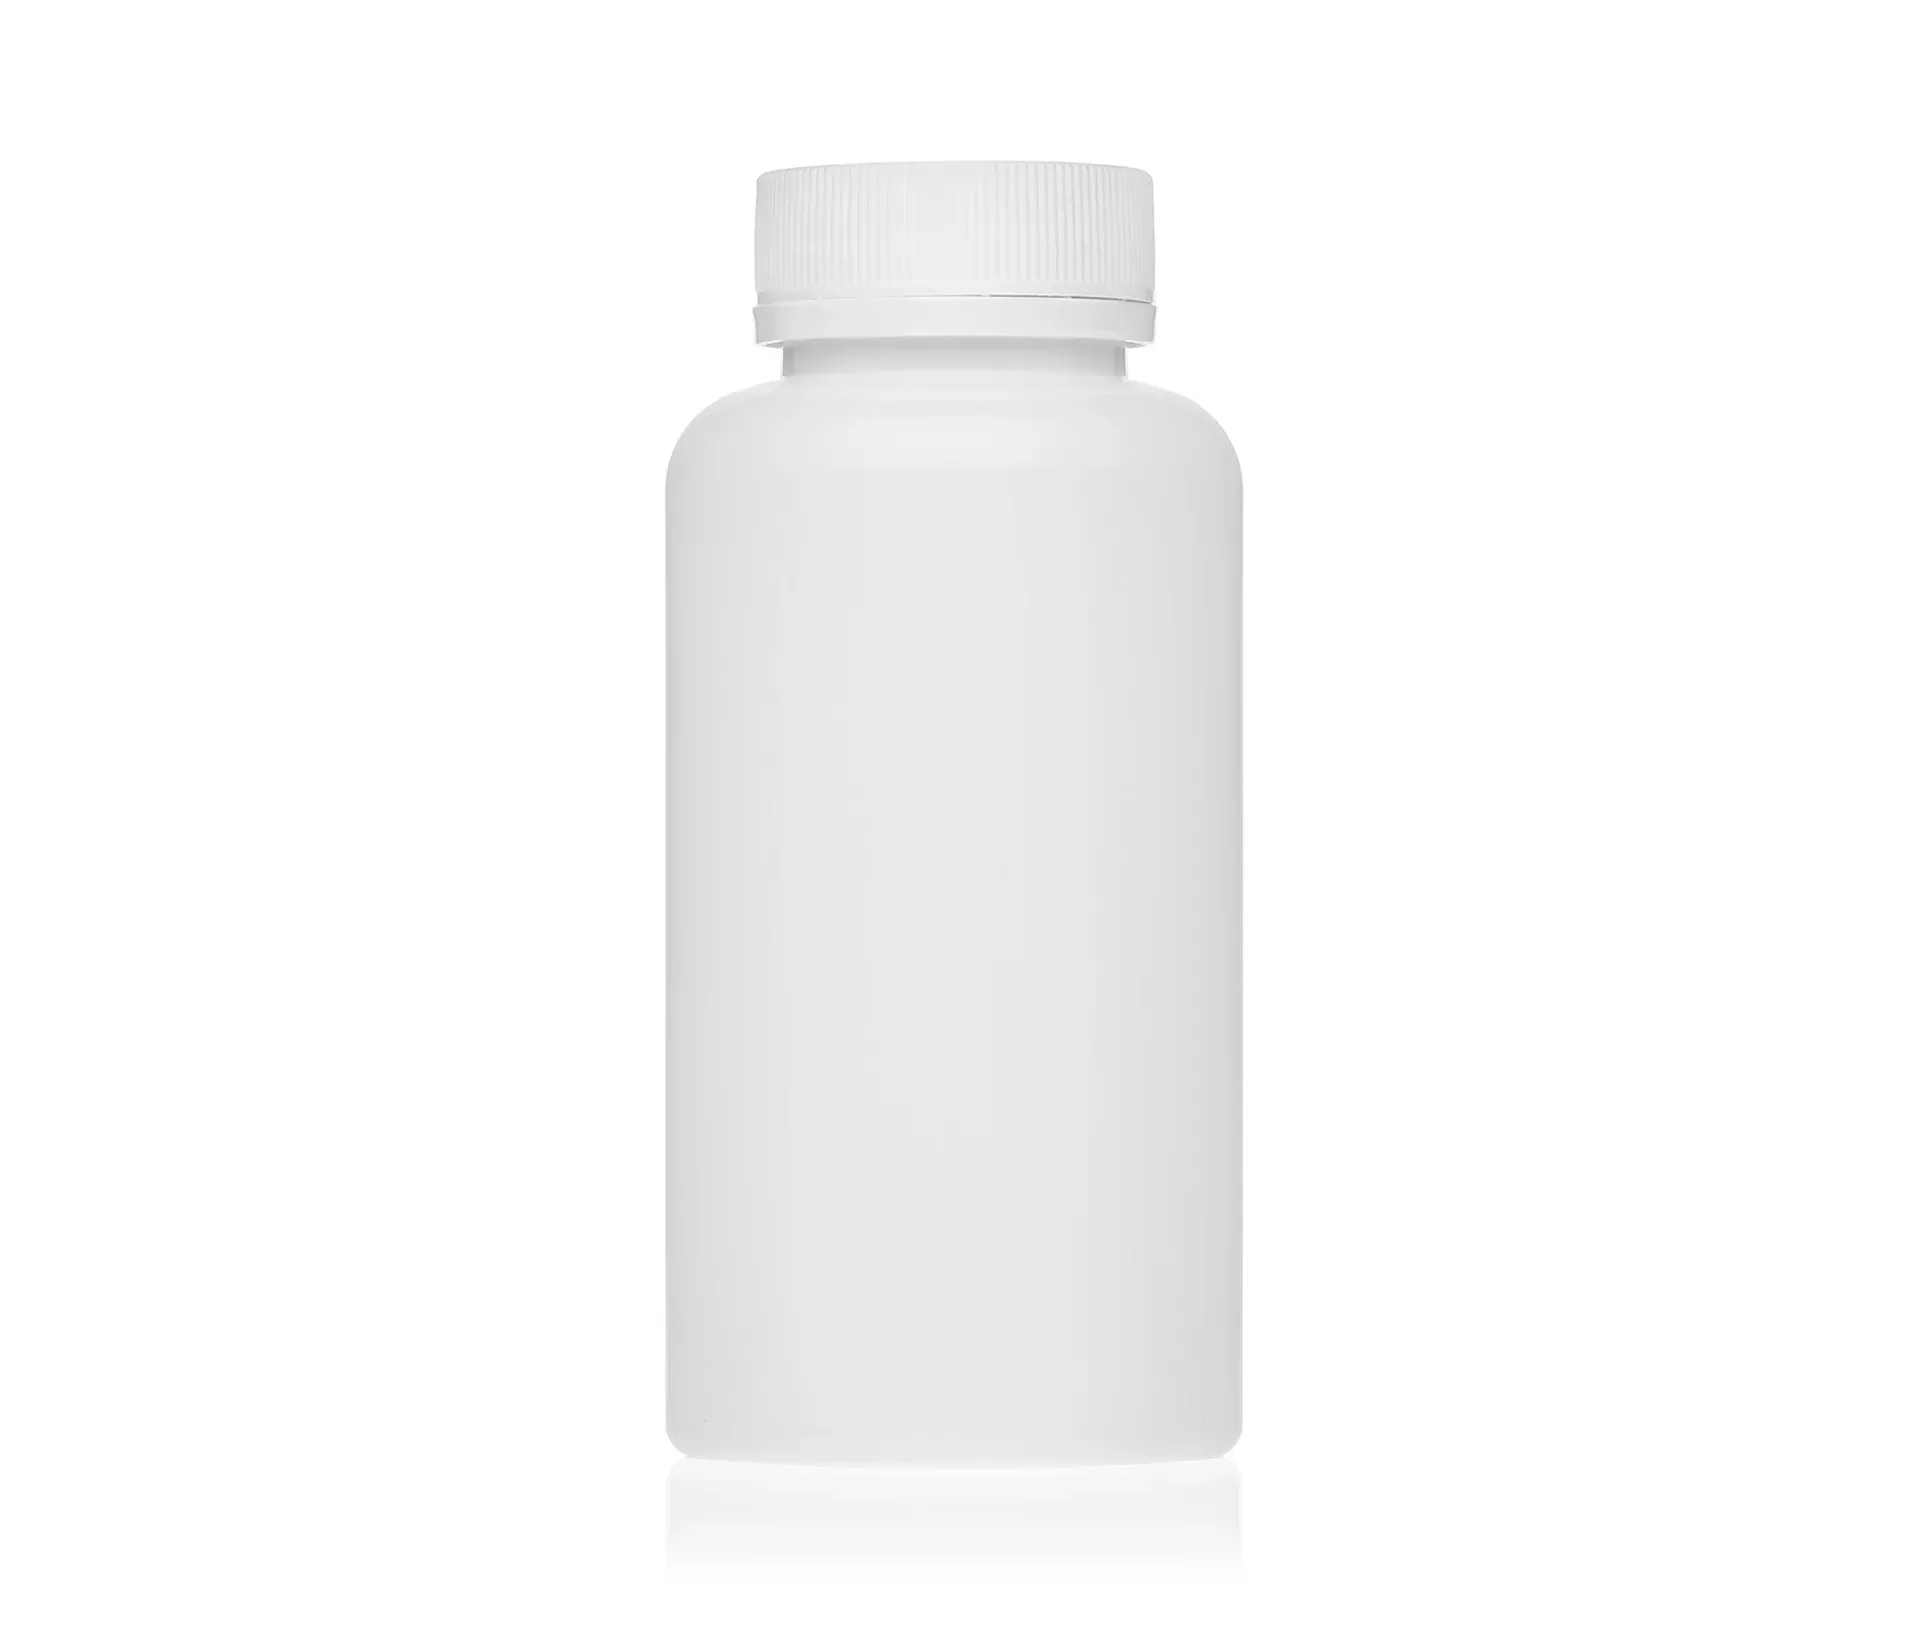 Medical capsule container K1.3-250 by Pack Store Europe, packstore.eu